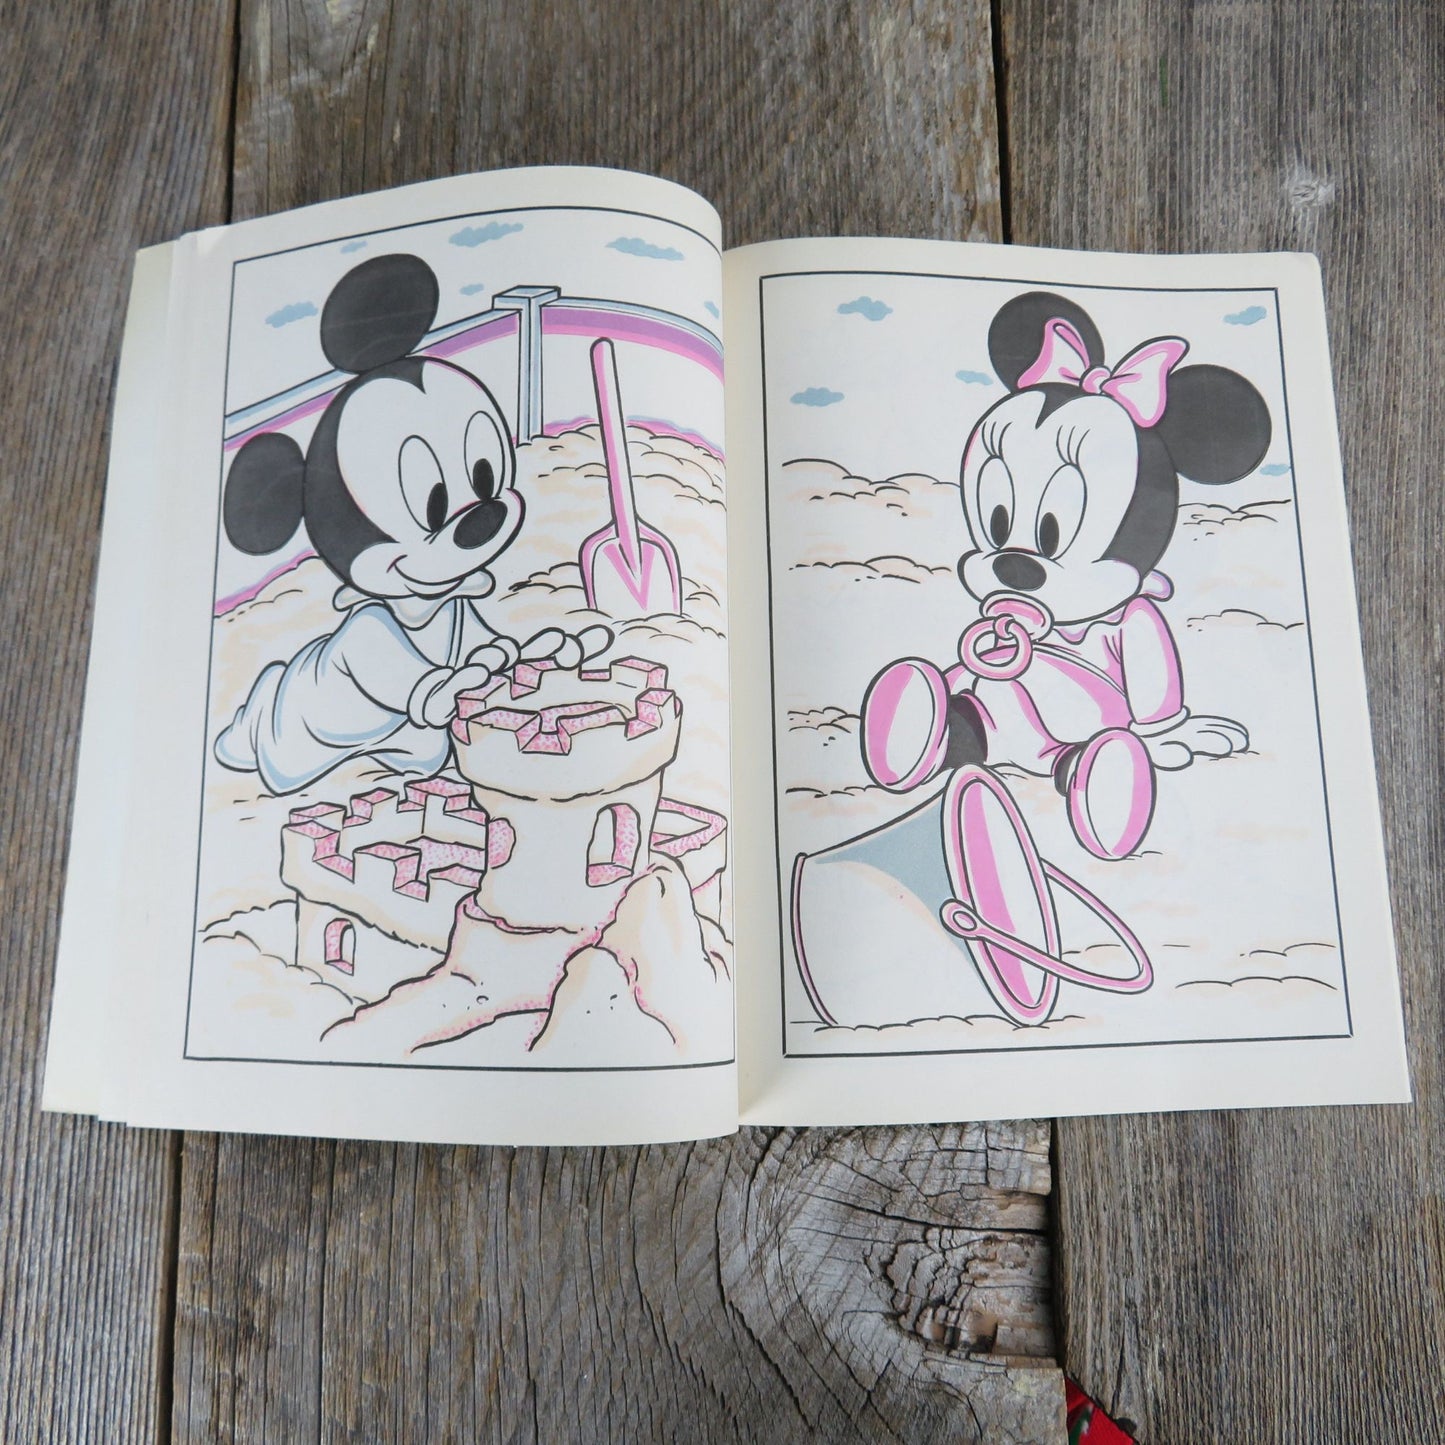 Vintage Disney Babies Paint With Water Mickey Mouse Donald Duck Coloring Book Golden Books 1991